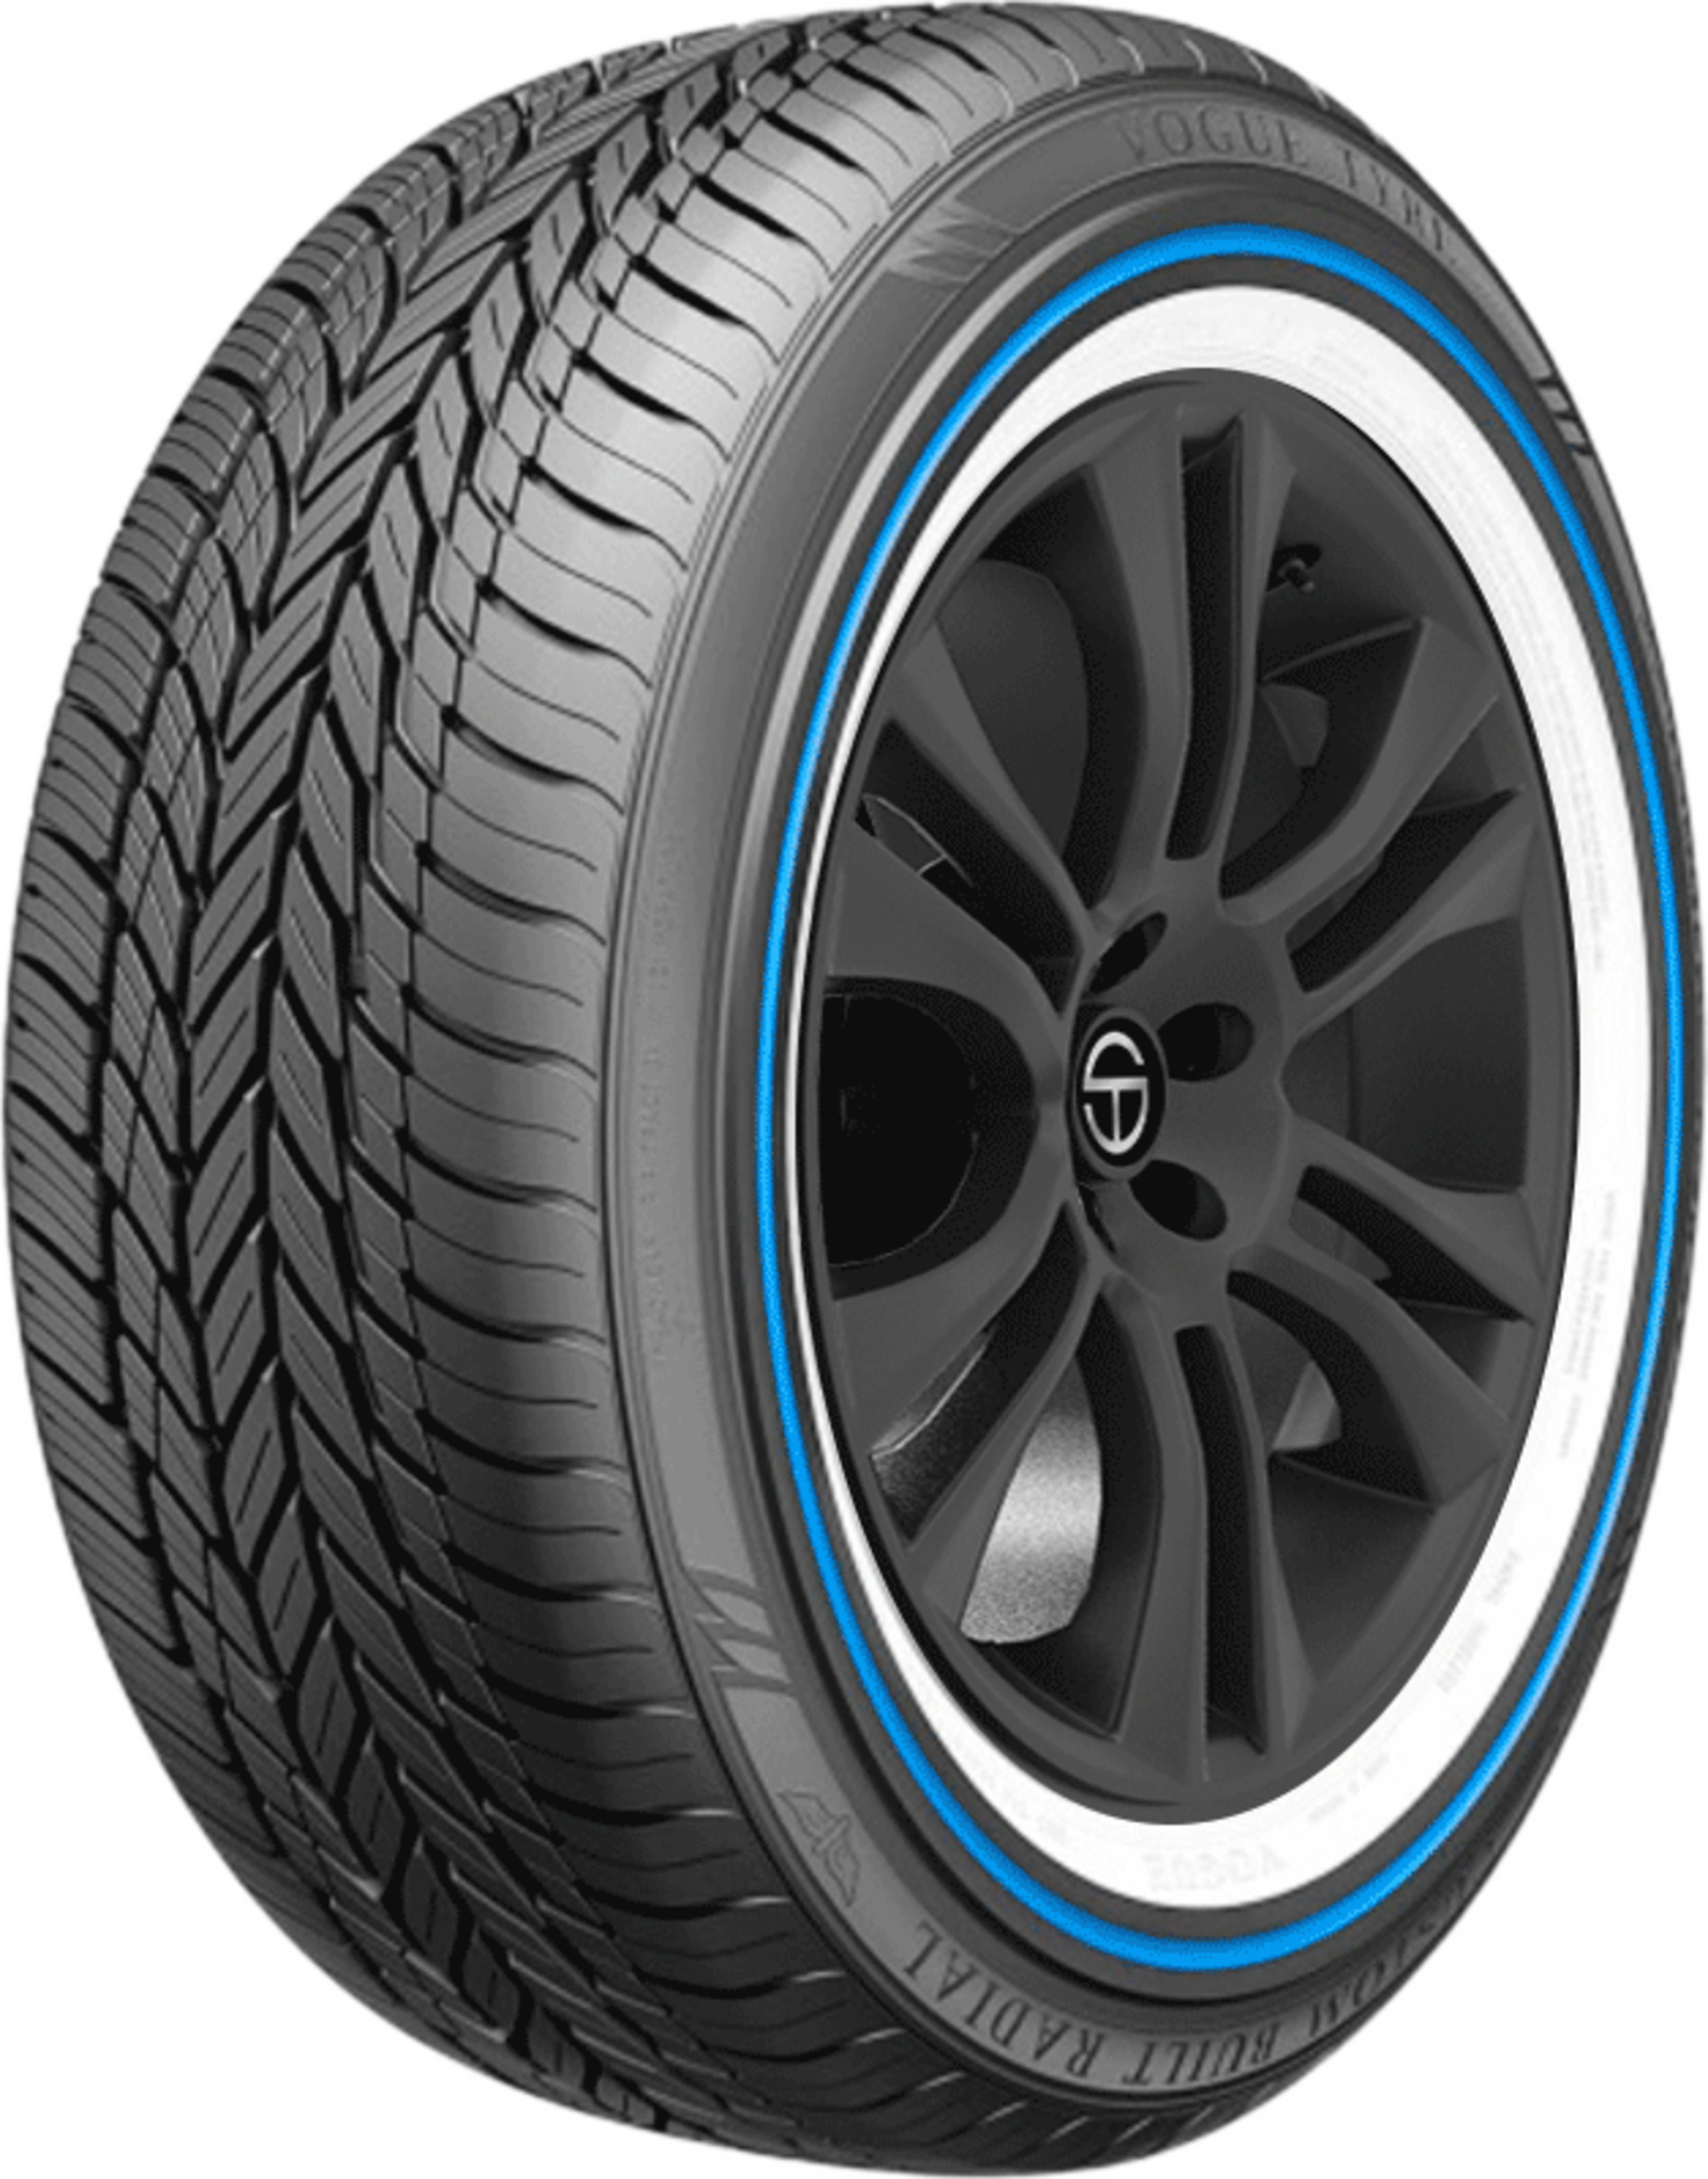 Shop for 245/40ZR20 Tires for Your Vehicle | SimpleTire